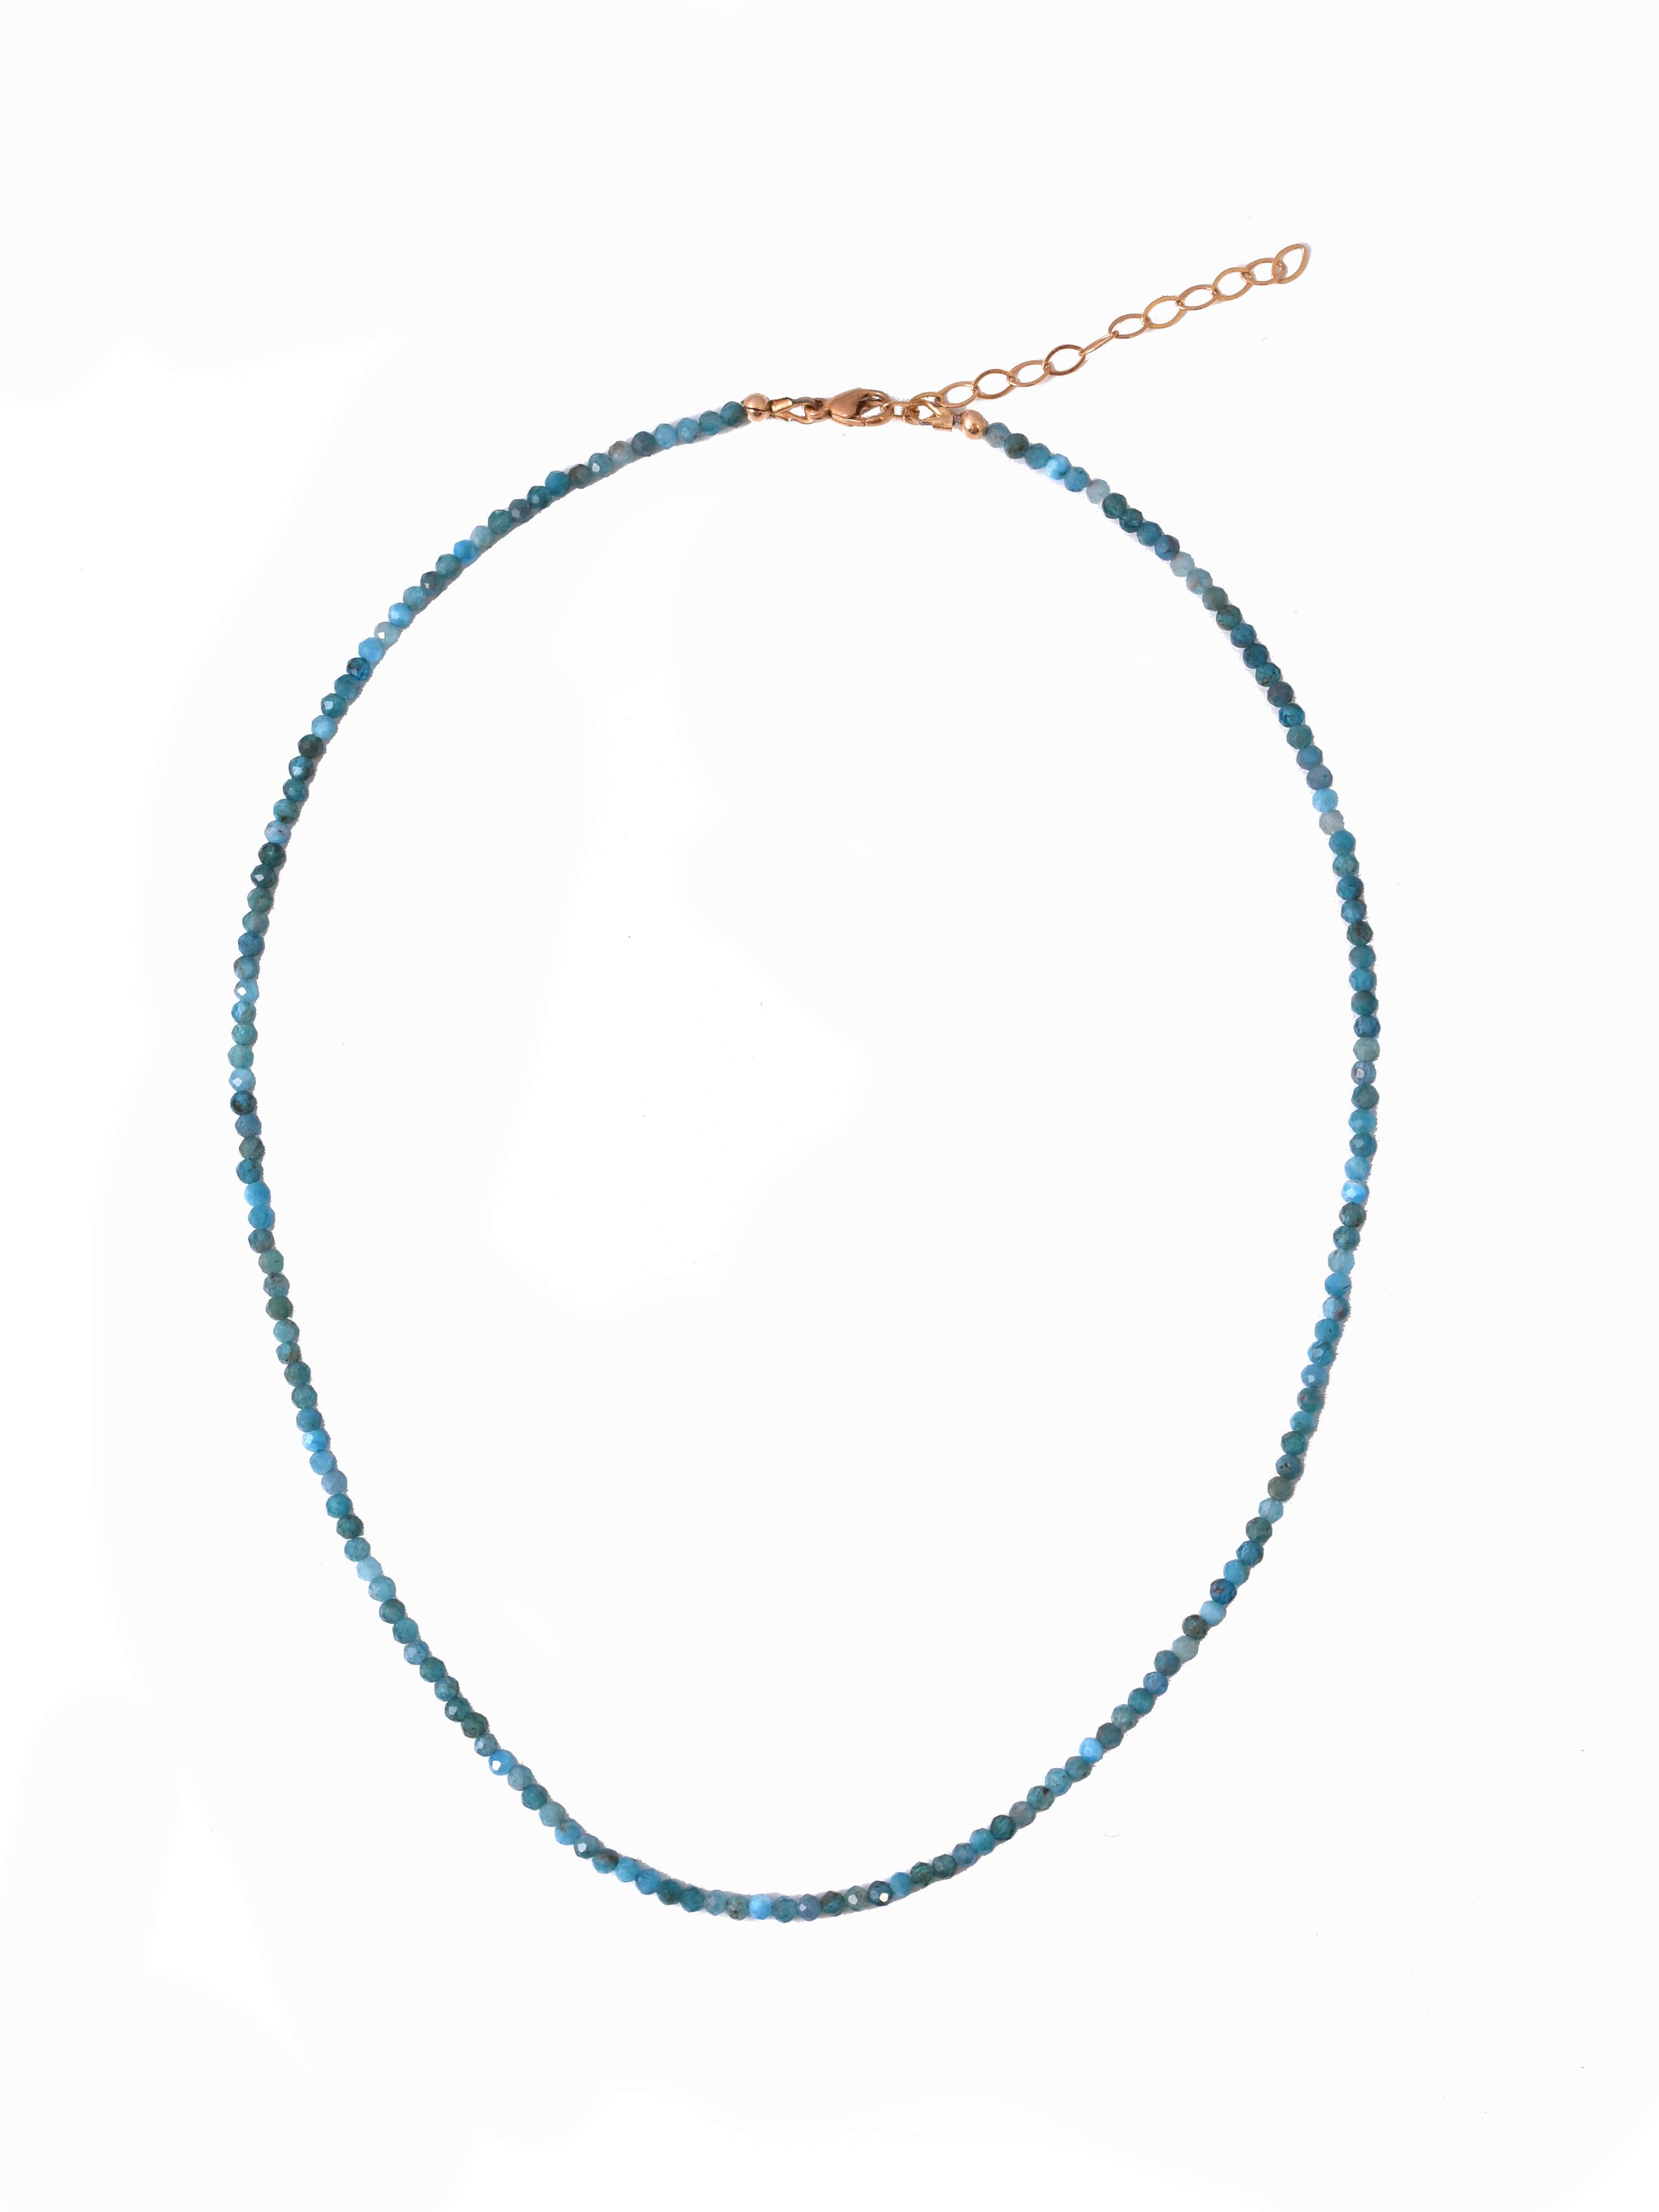 Blue Apatite Dainty Beaded Necklace